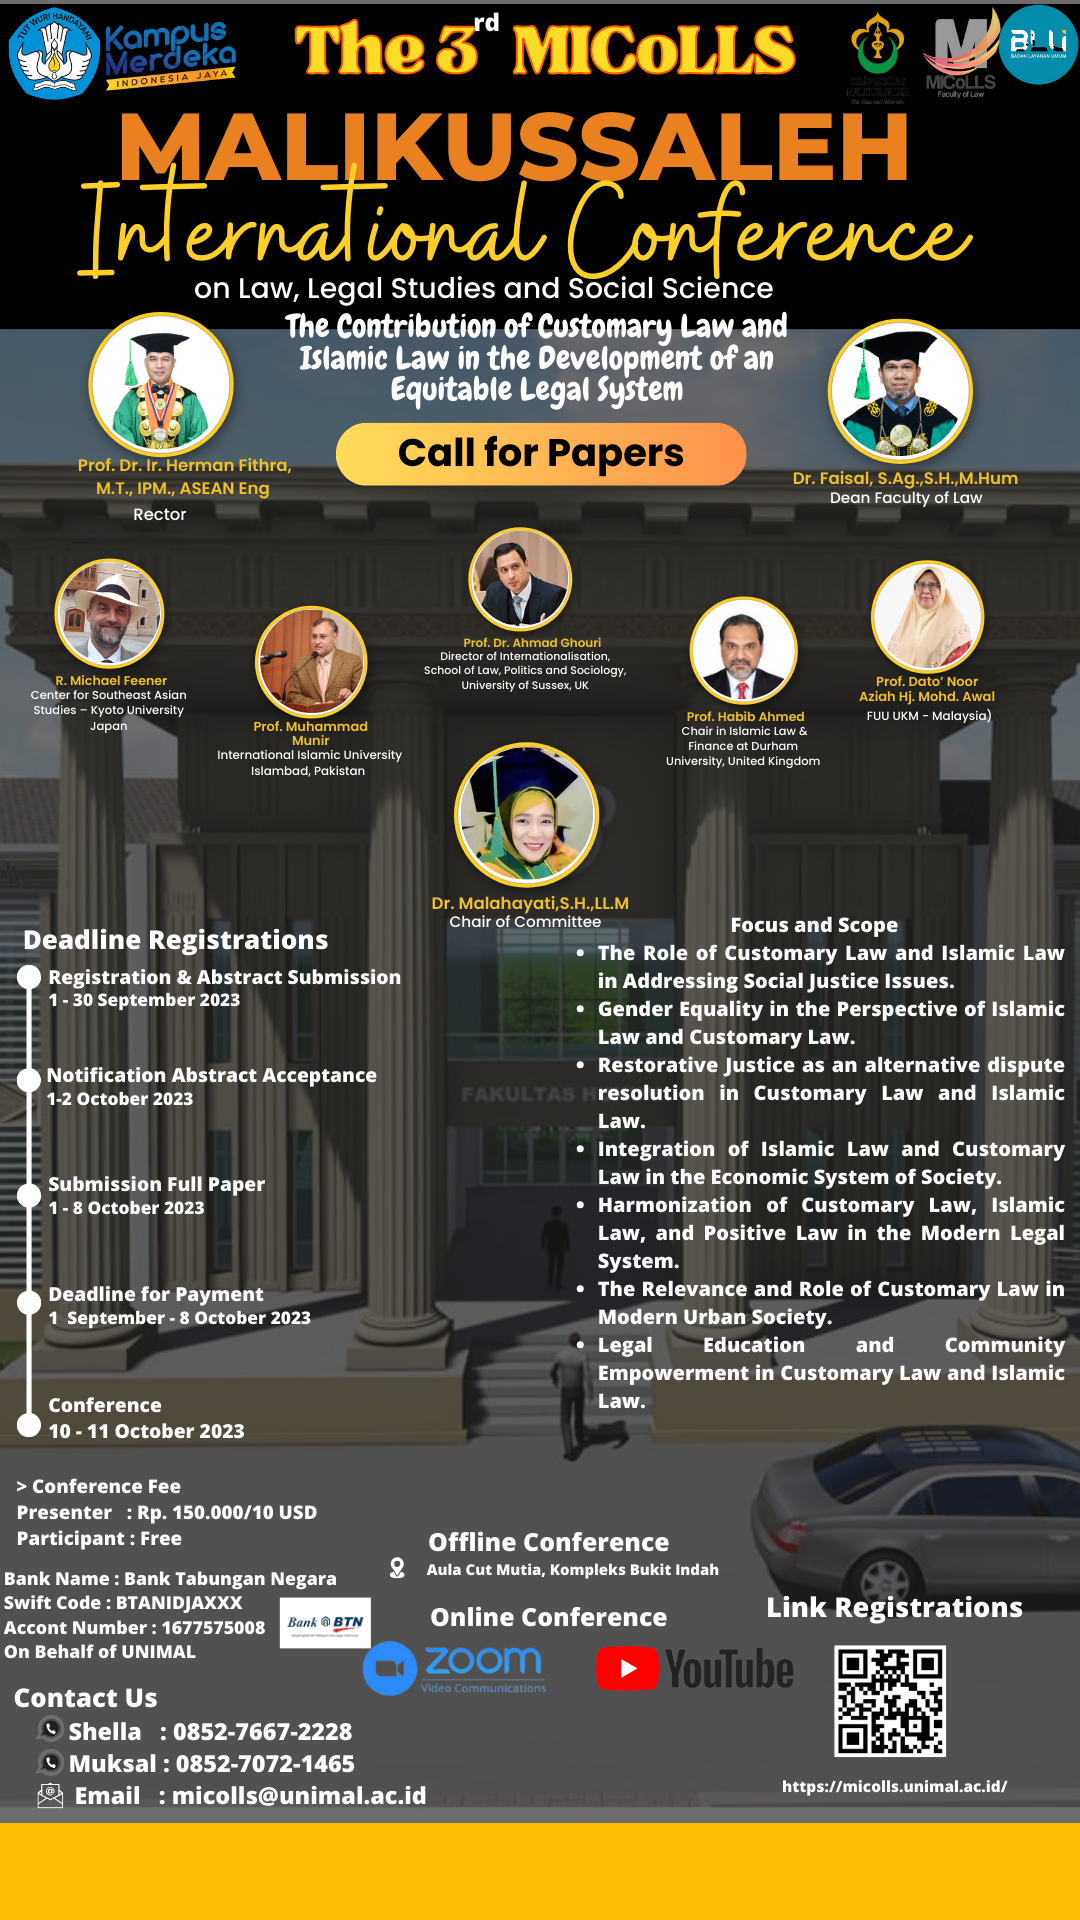 Conference Homepage Image